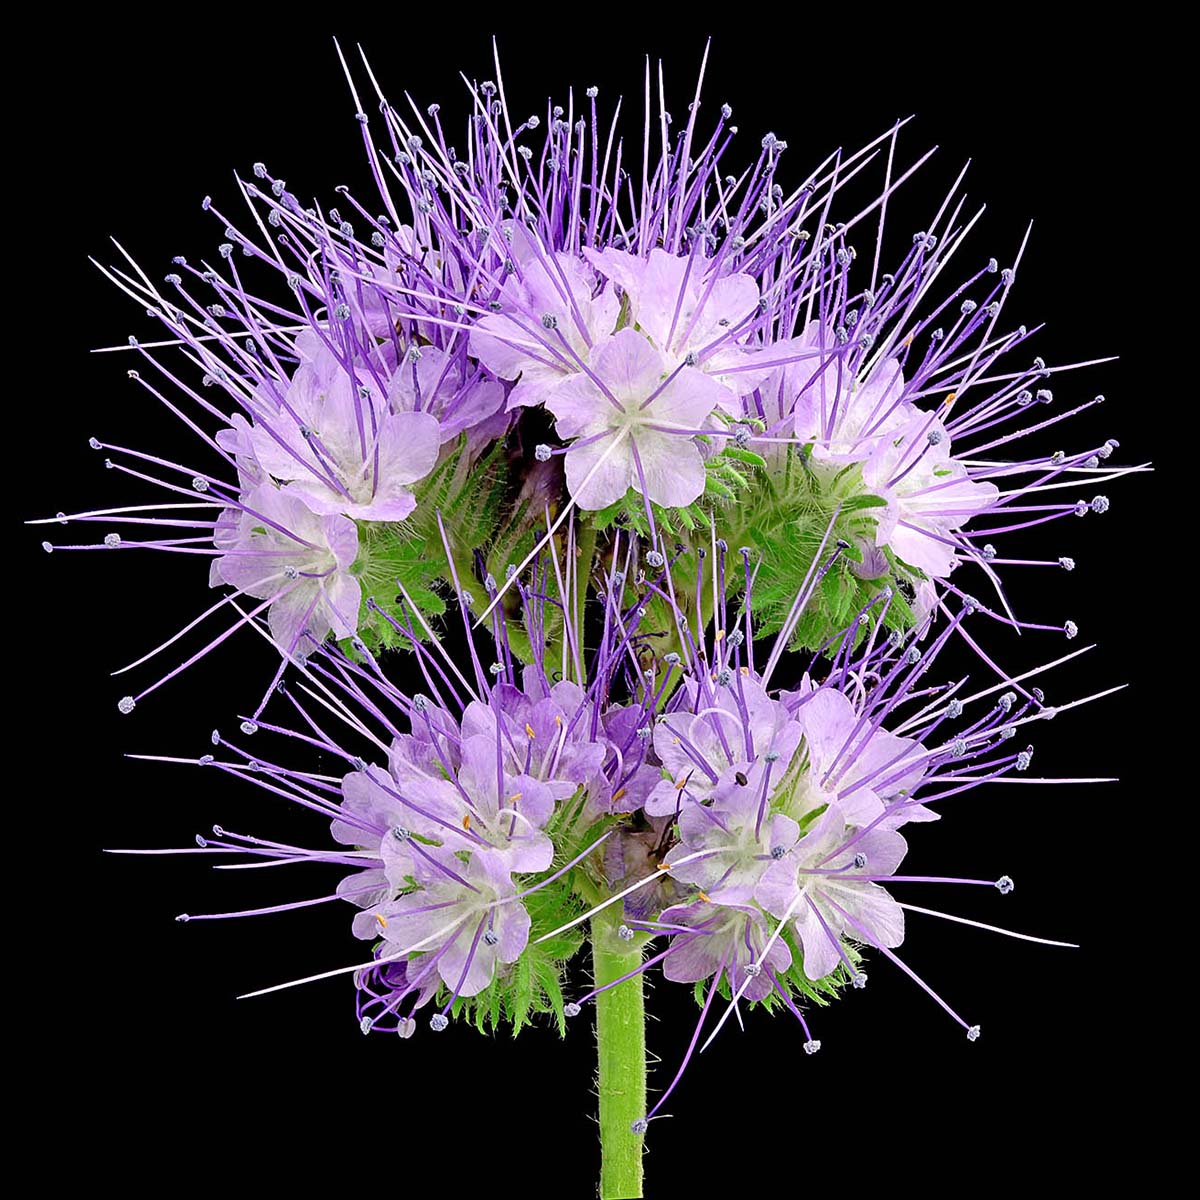 Phacelia Is the Precious Possession of Grower Maurits Keppel feature on Thursd